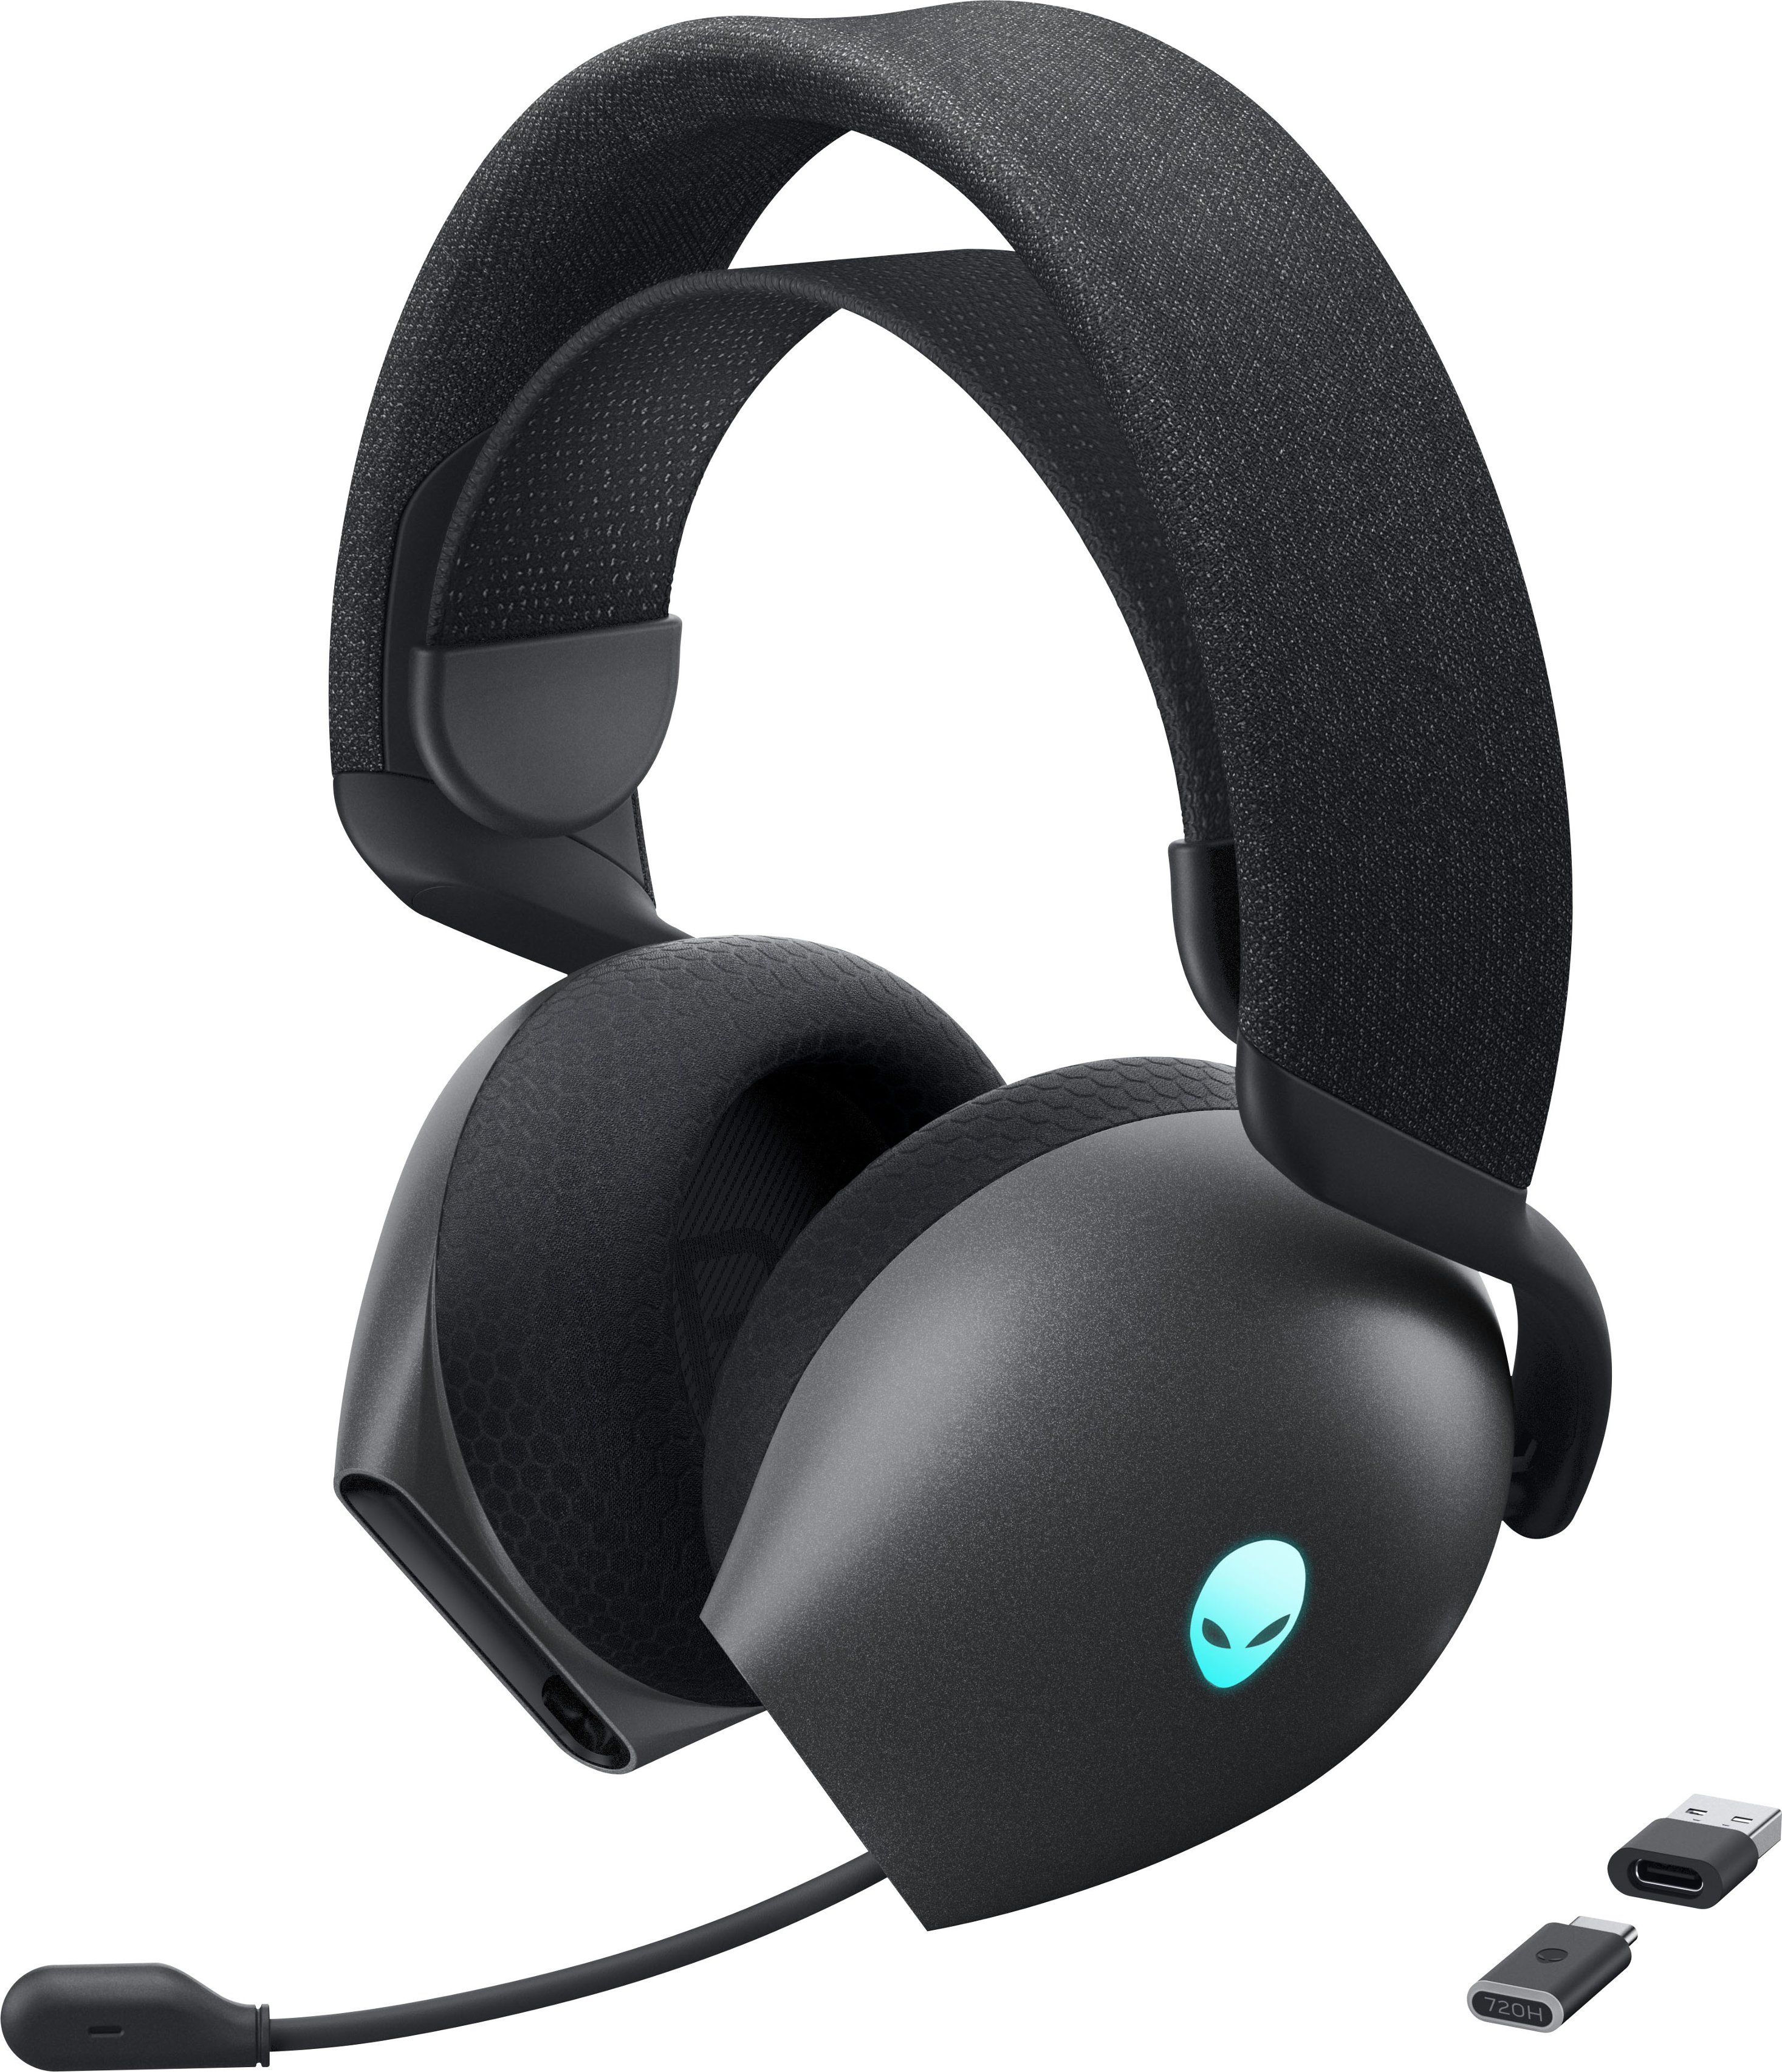 Angle View: Alienware - Dual Mode Wireless Gaming Headset - AW720H - Dark Side of the Moon